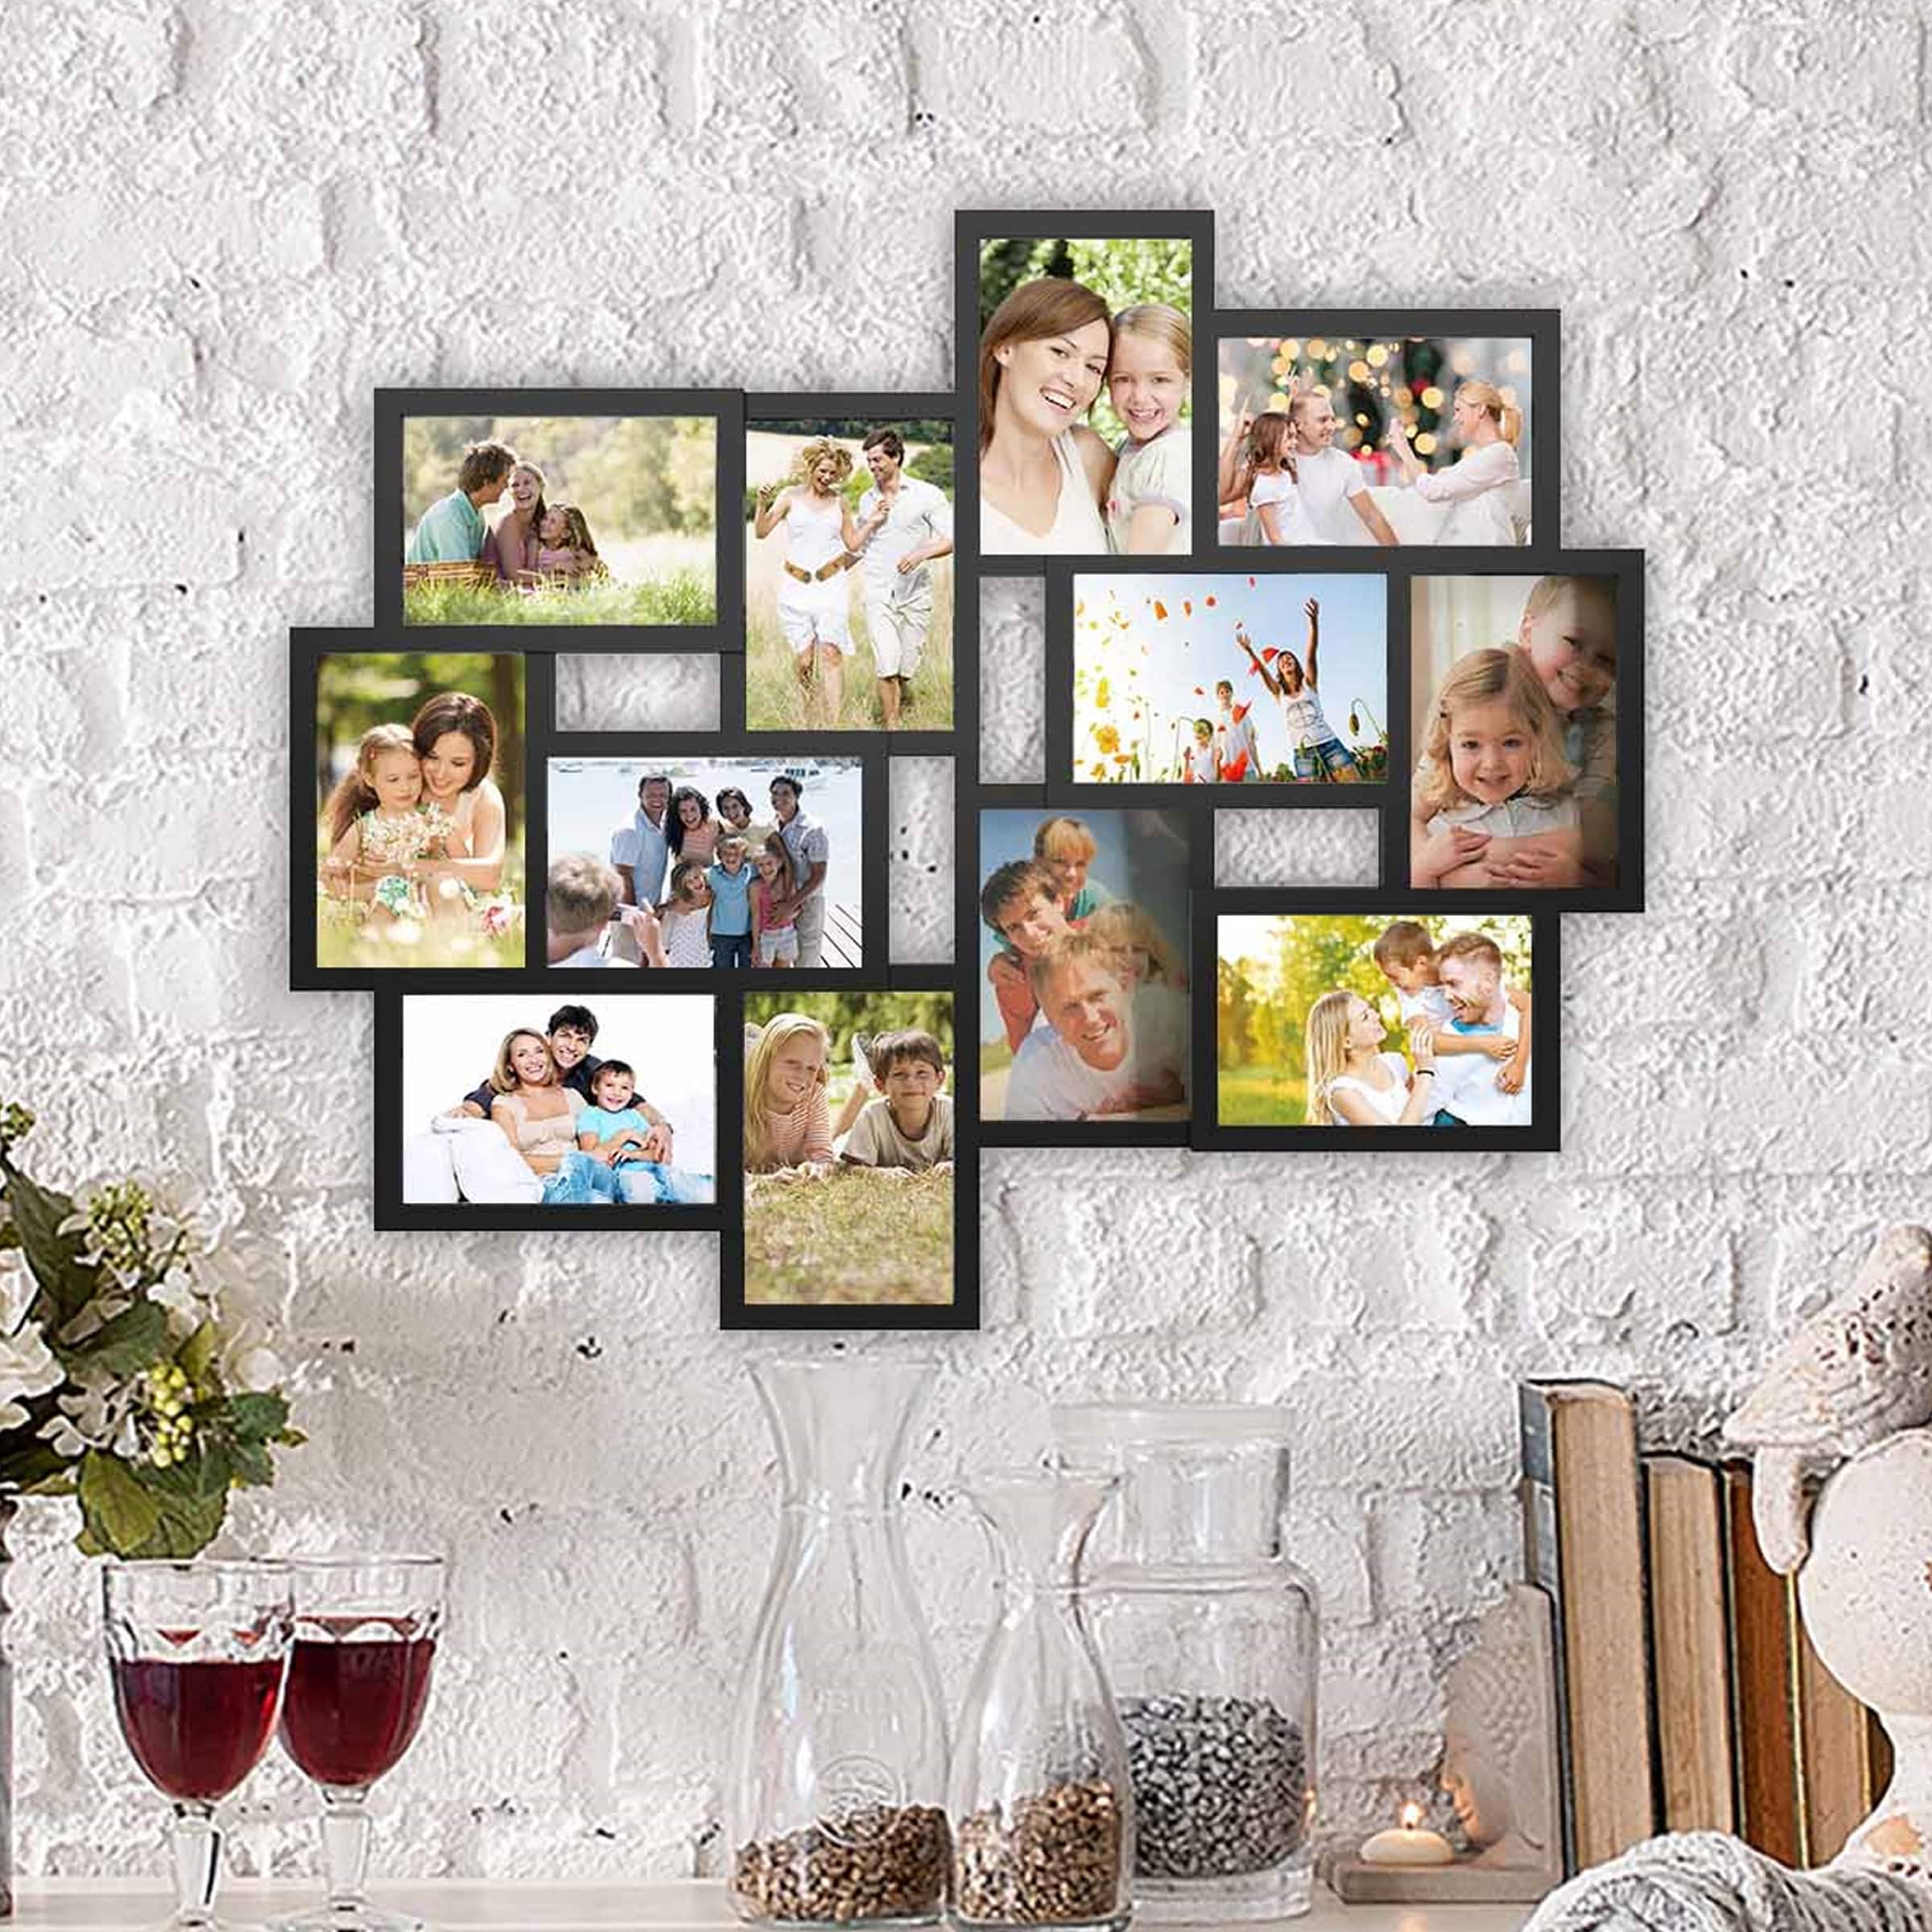 https://ak1.ostkcdn.com/images/products/is/images/direct/64ddf0b115e1c6bd38f13e07a821f74e319ce78a/Lavish-Home-12-Photo-Picture-Frame-Collage%2C-Black.jpg